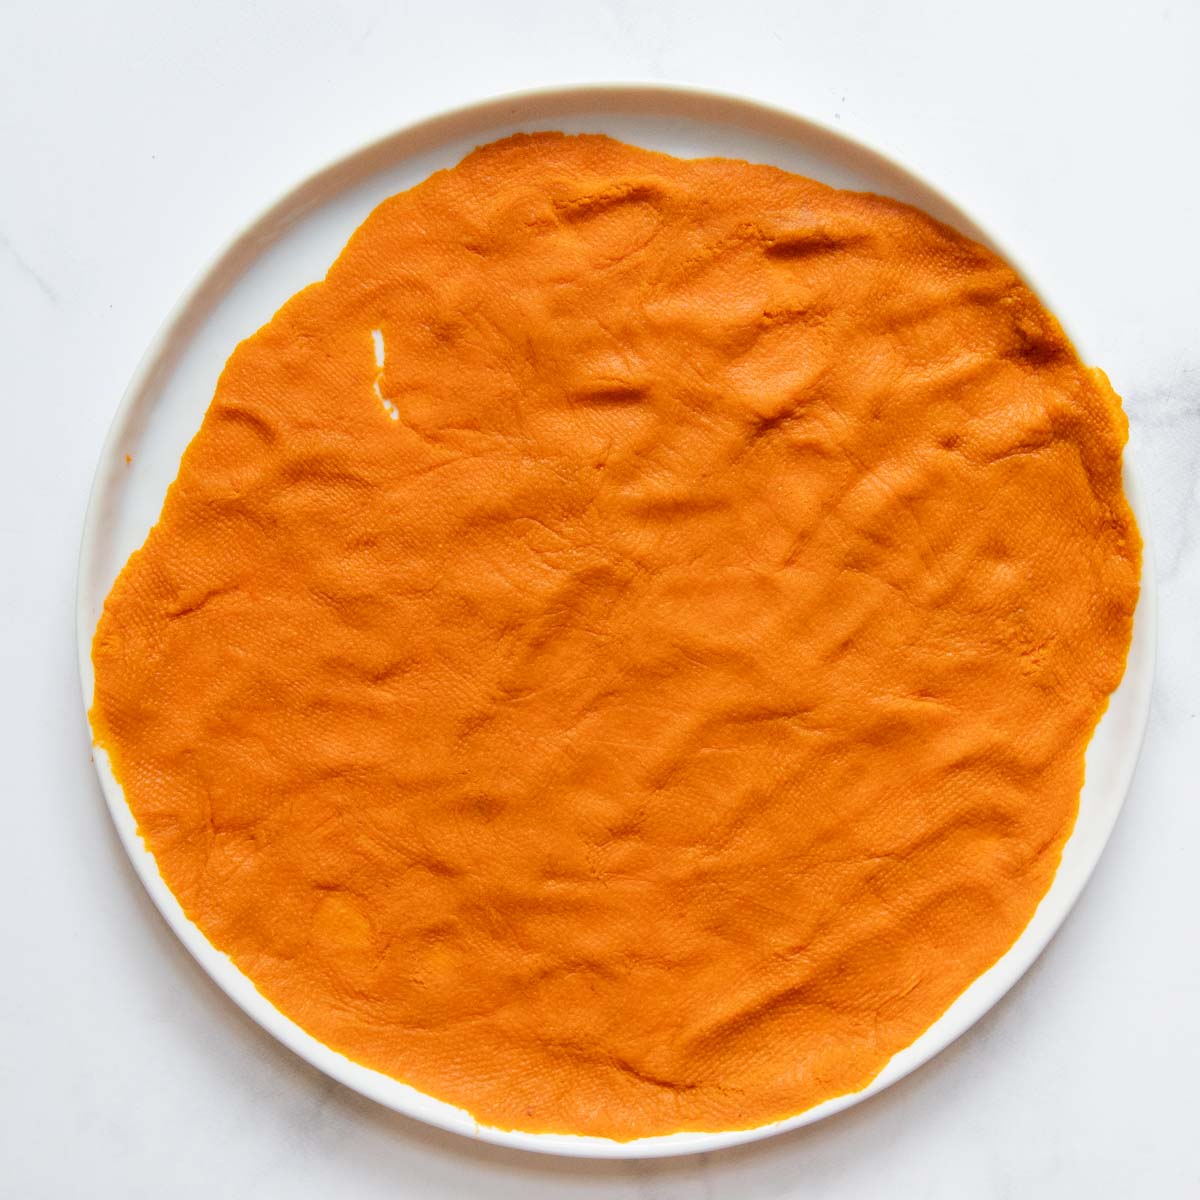 canned pumpkin spread on a white plate.